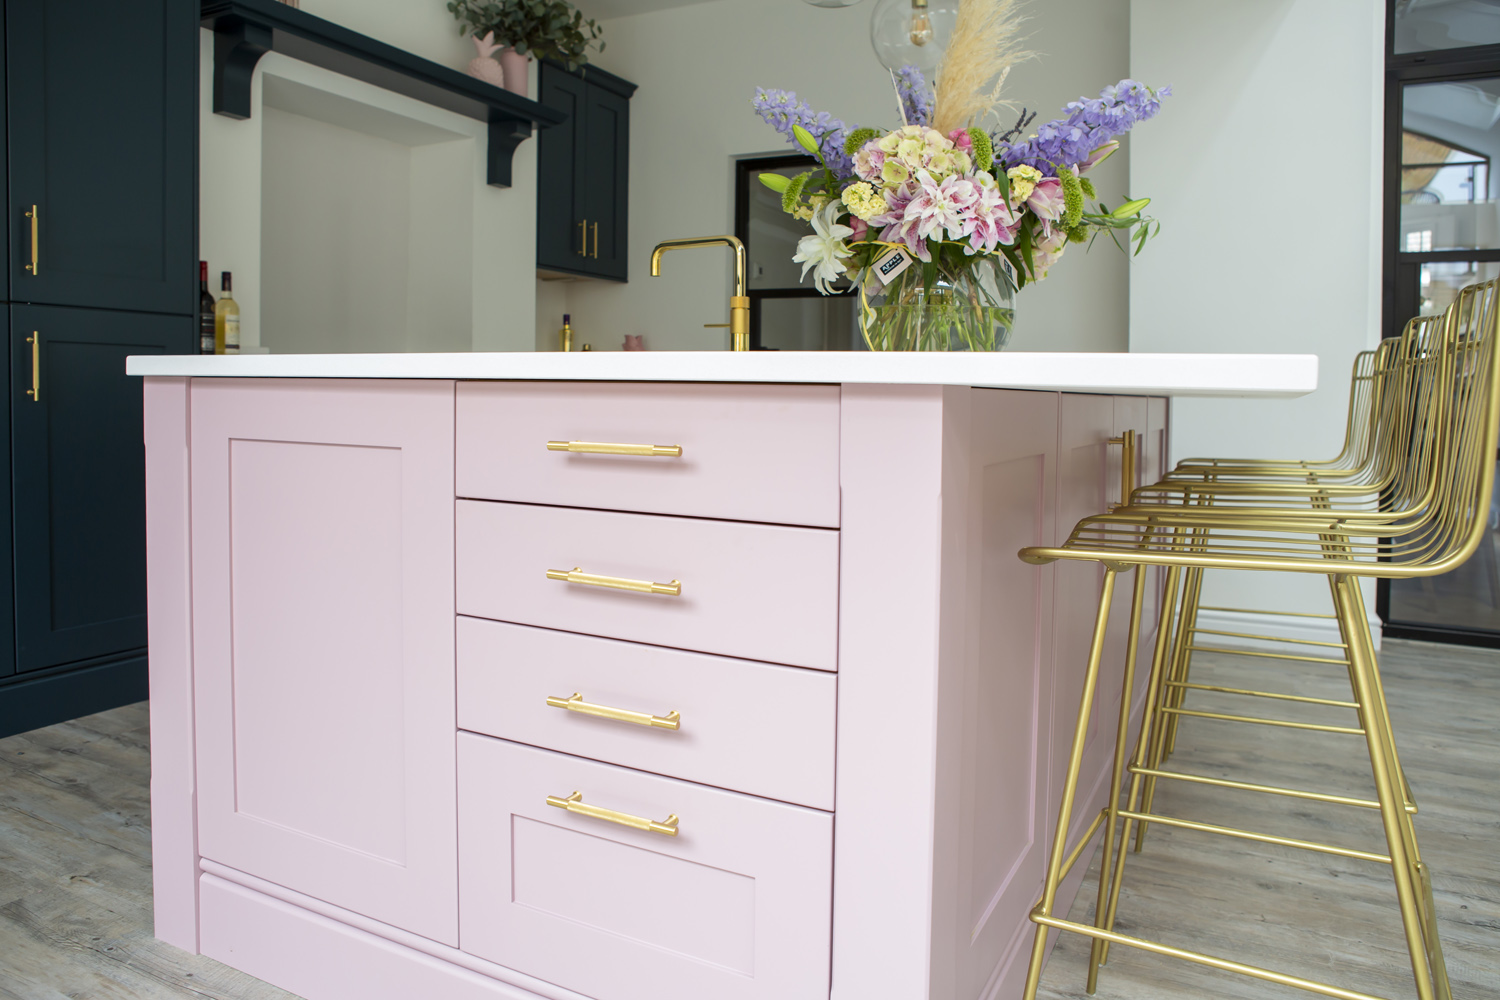 Dusky pink kitchen island with gold bar stools